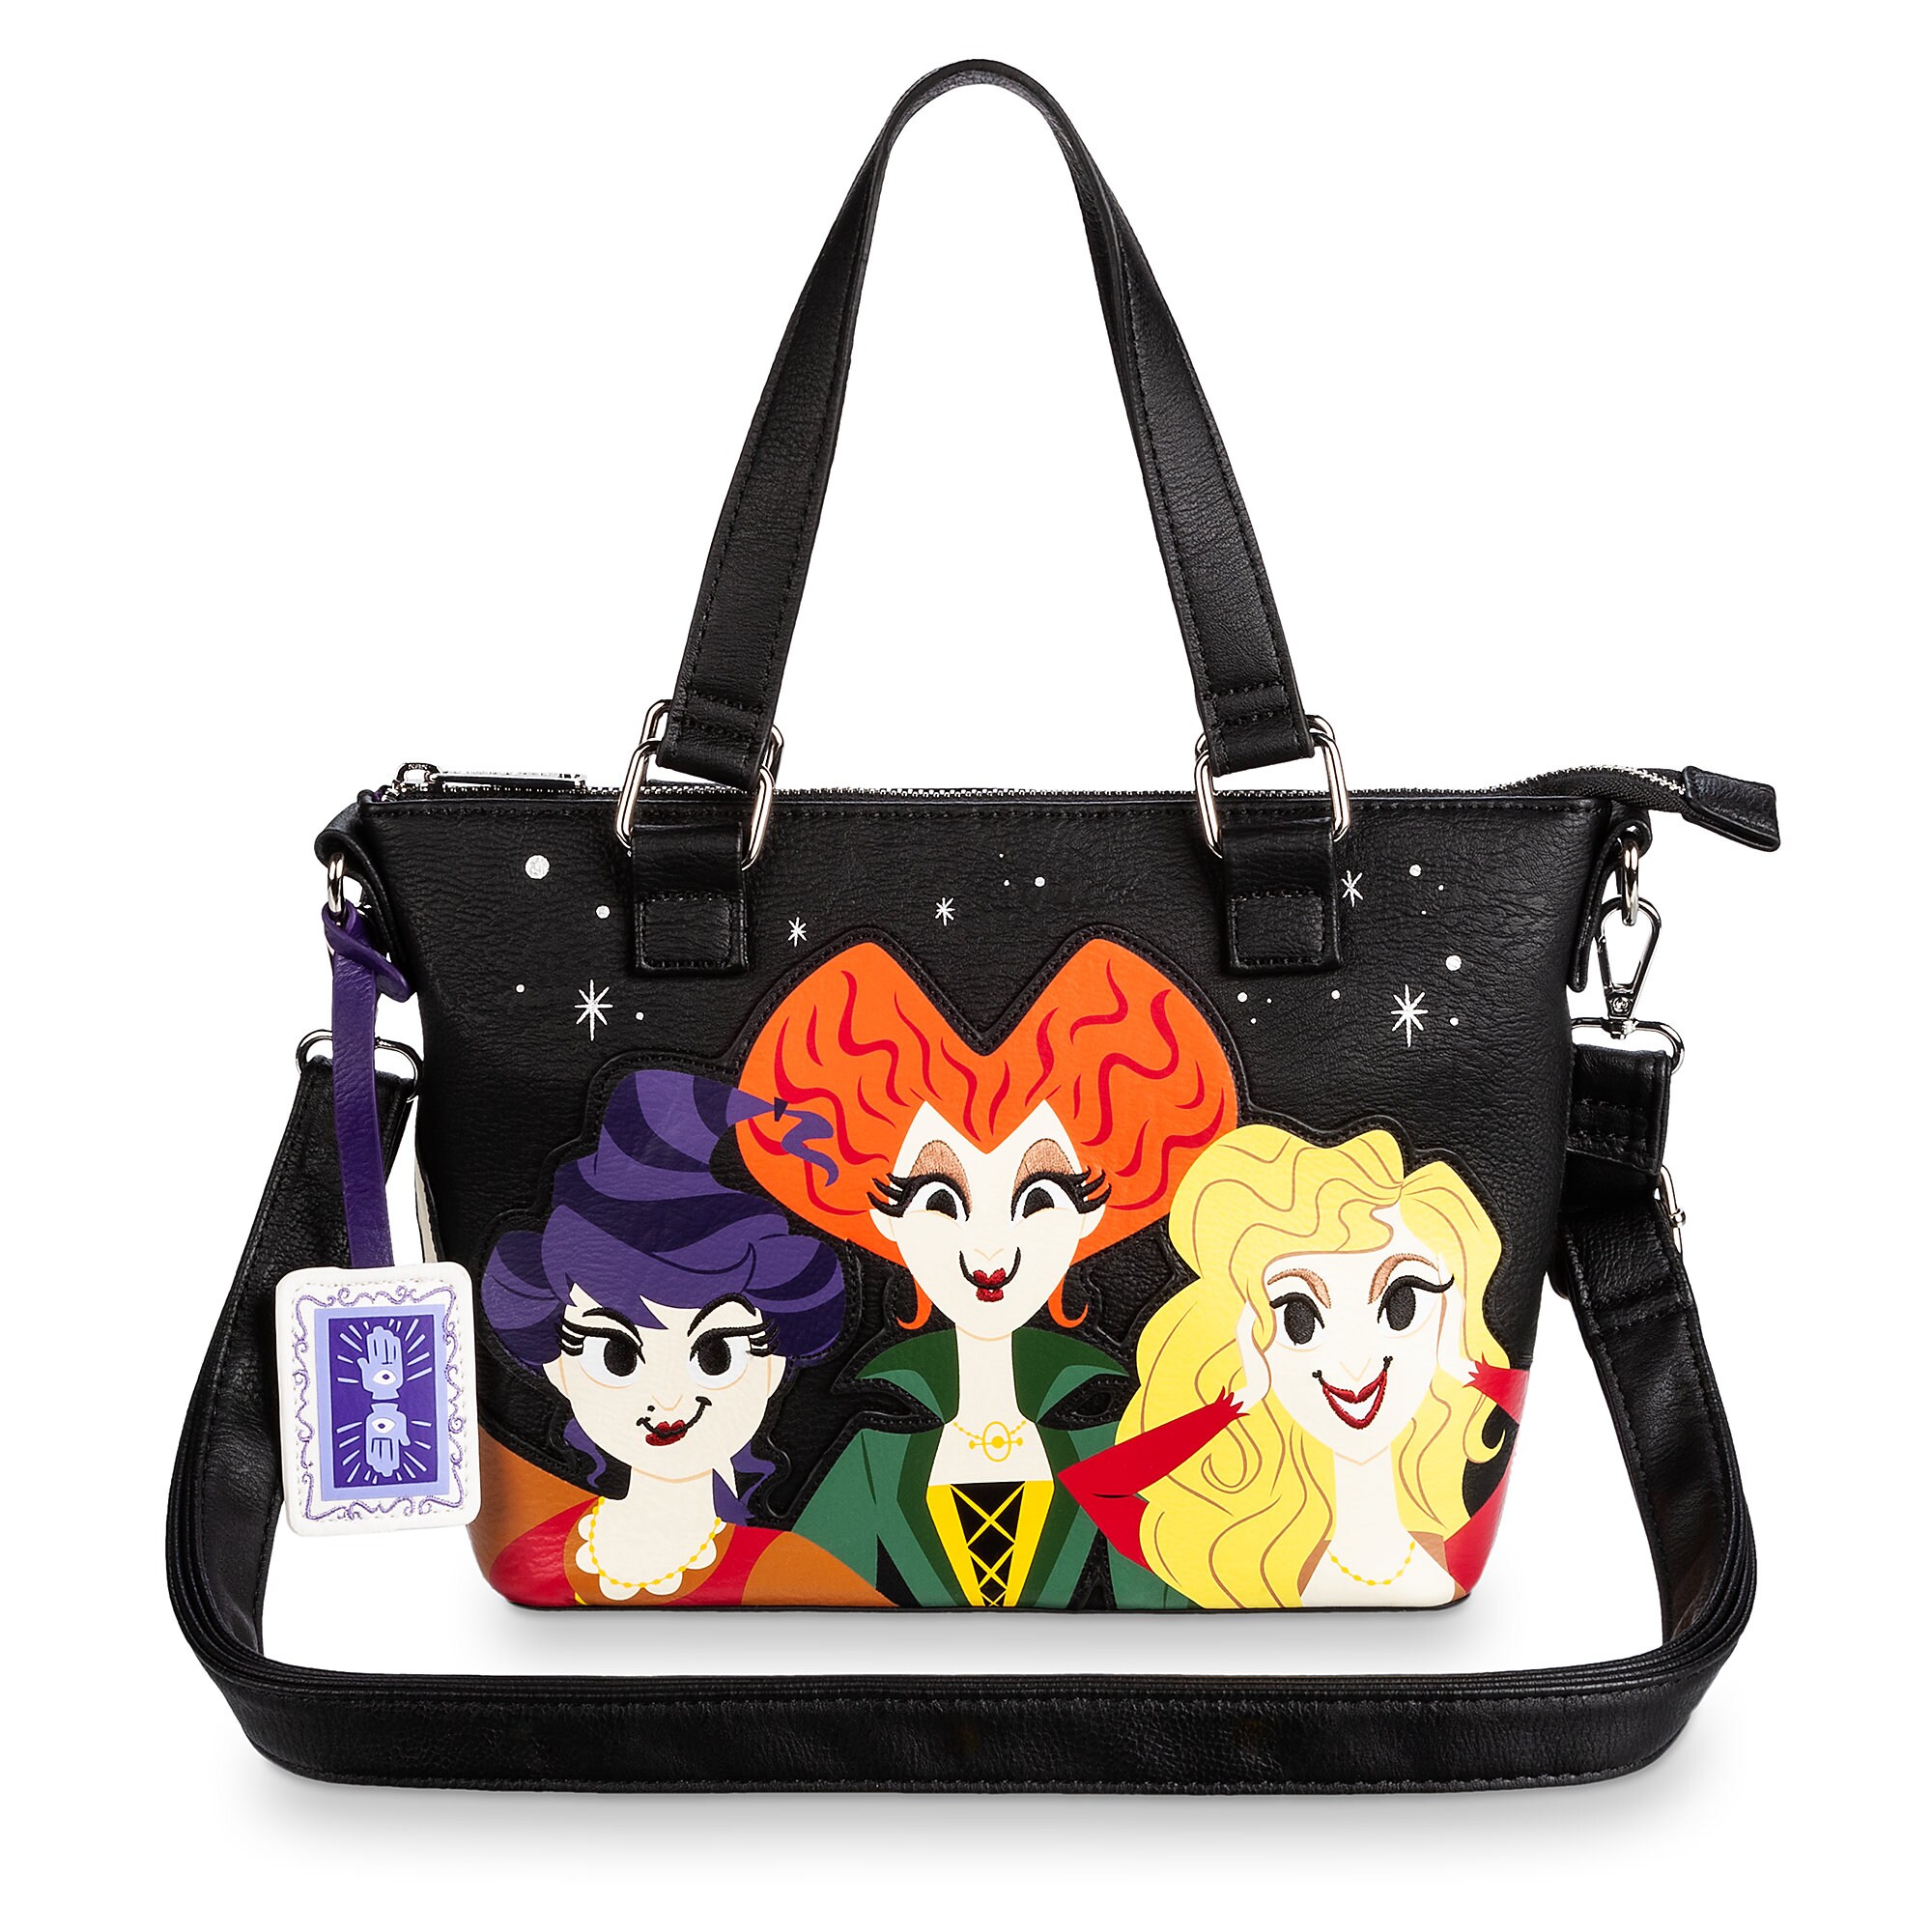 Hocus Pocus Crossbody Bag by Loungefly now available for purchase